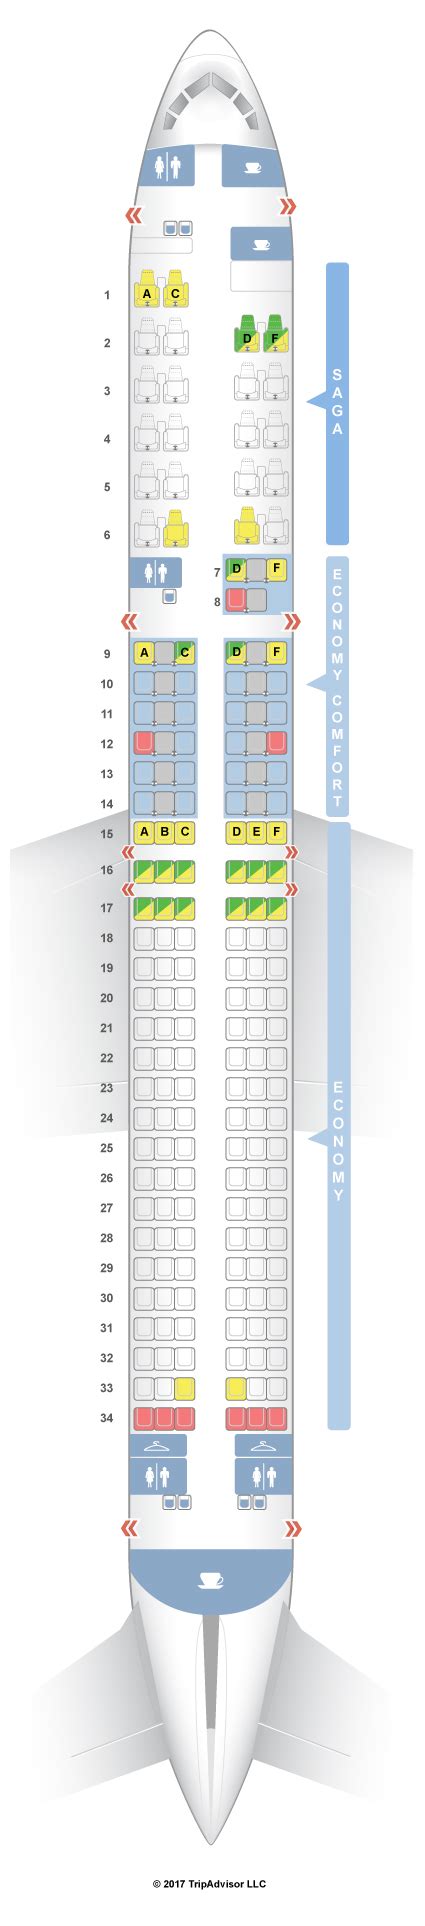 TUI UK Seat Maps. Boeing 757-200 (752) Overview; Plane